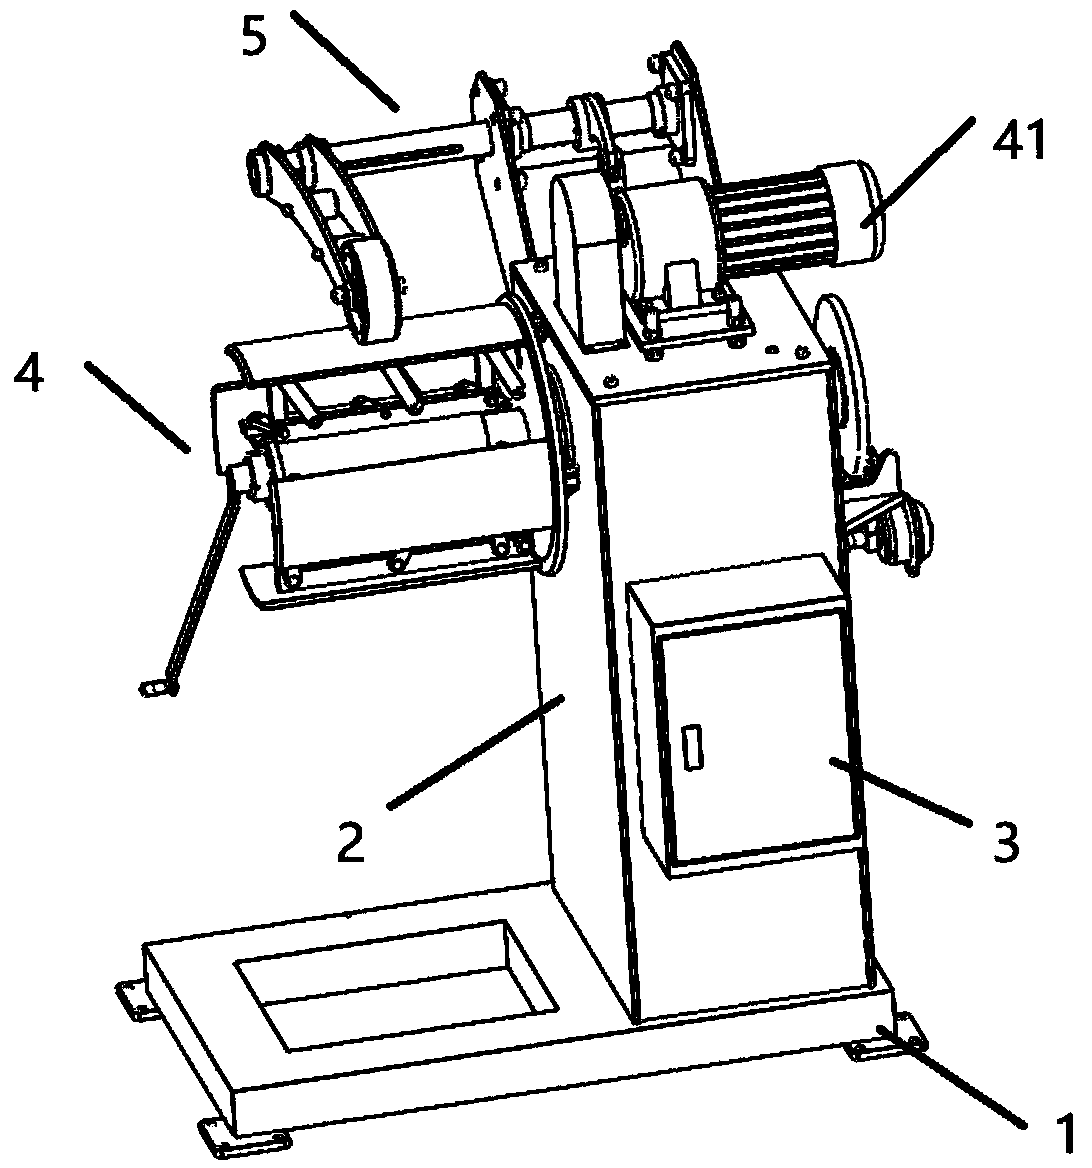 Bundle rolling device for fur collection